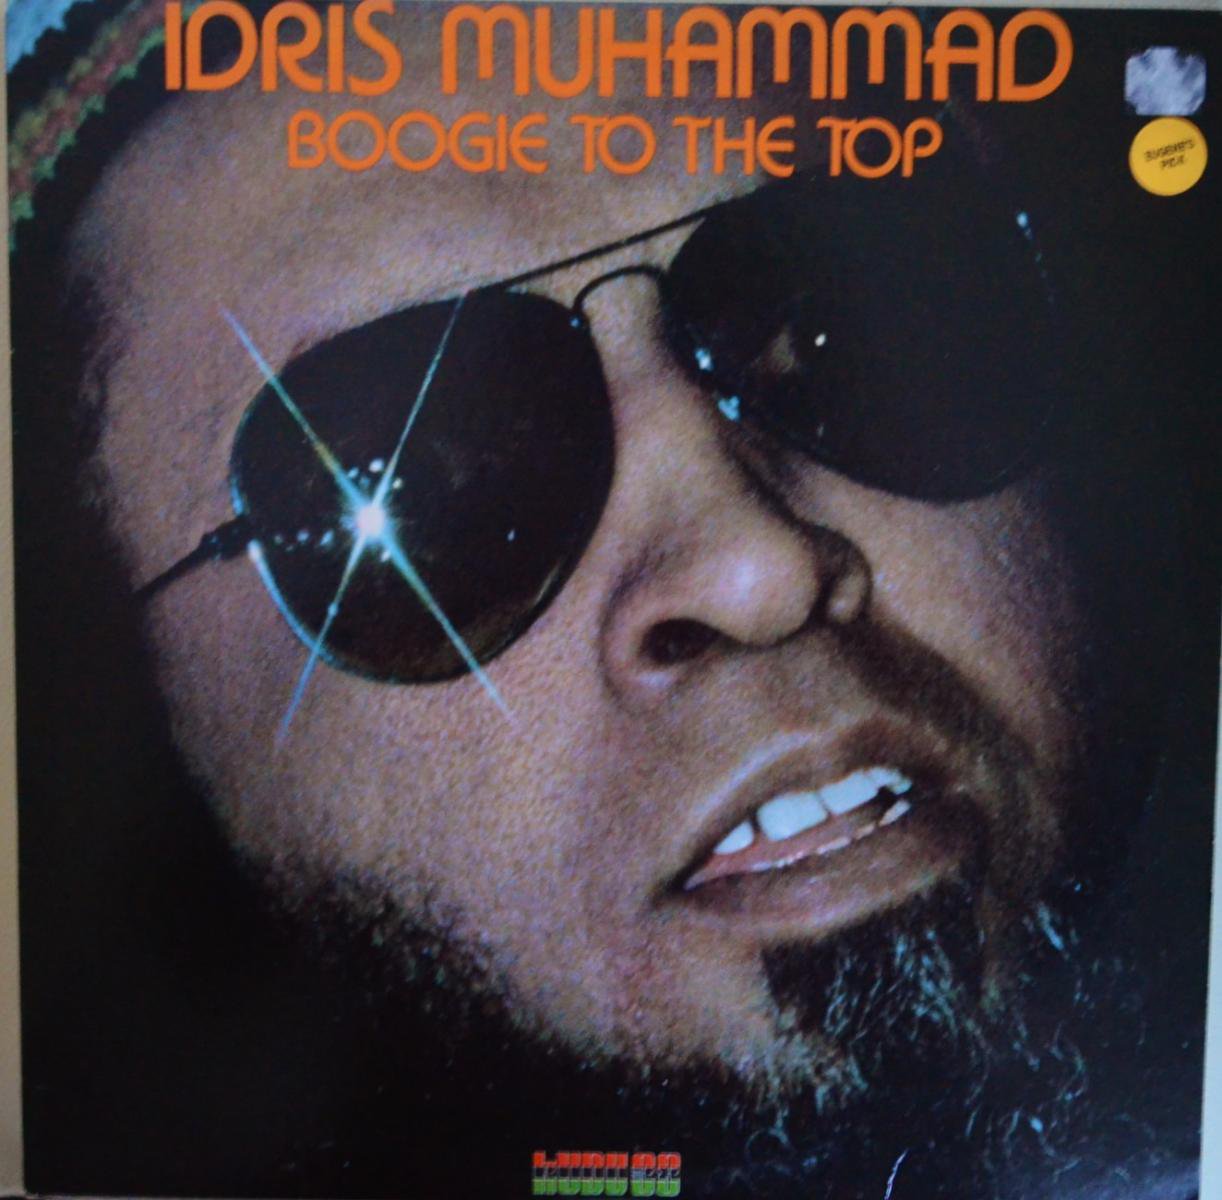 IDRIS MUHAMMAD / BOOGIE TO THE TOP (LP)